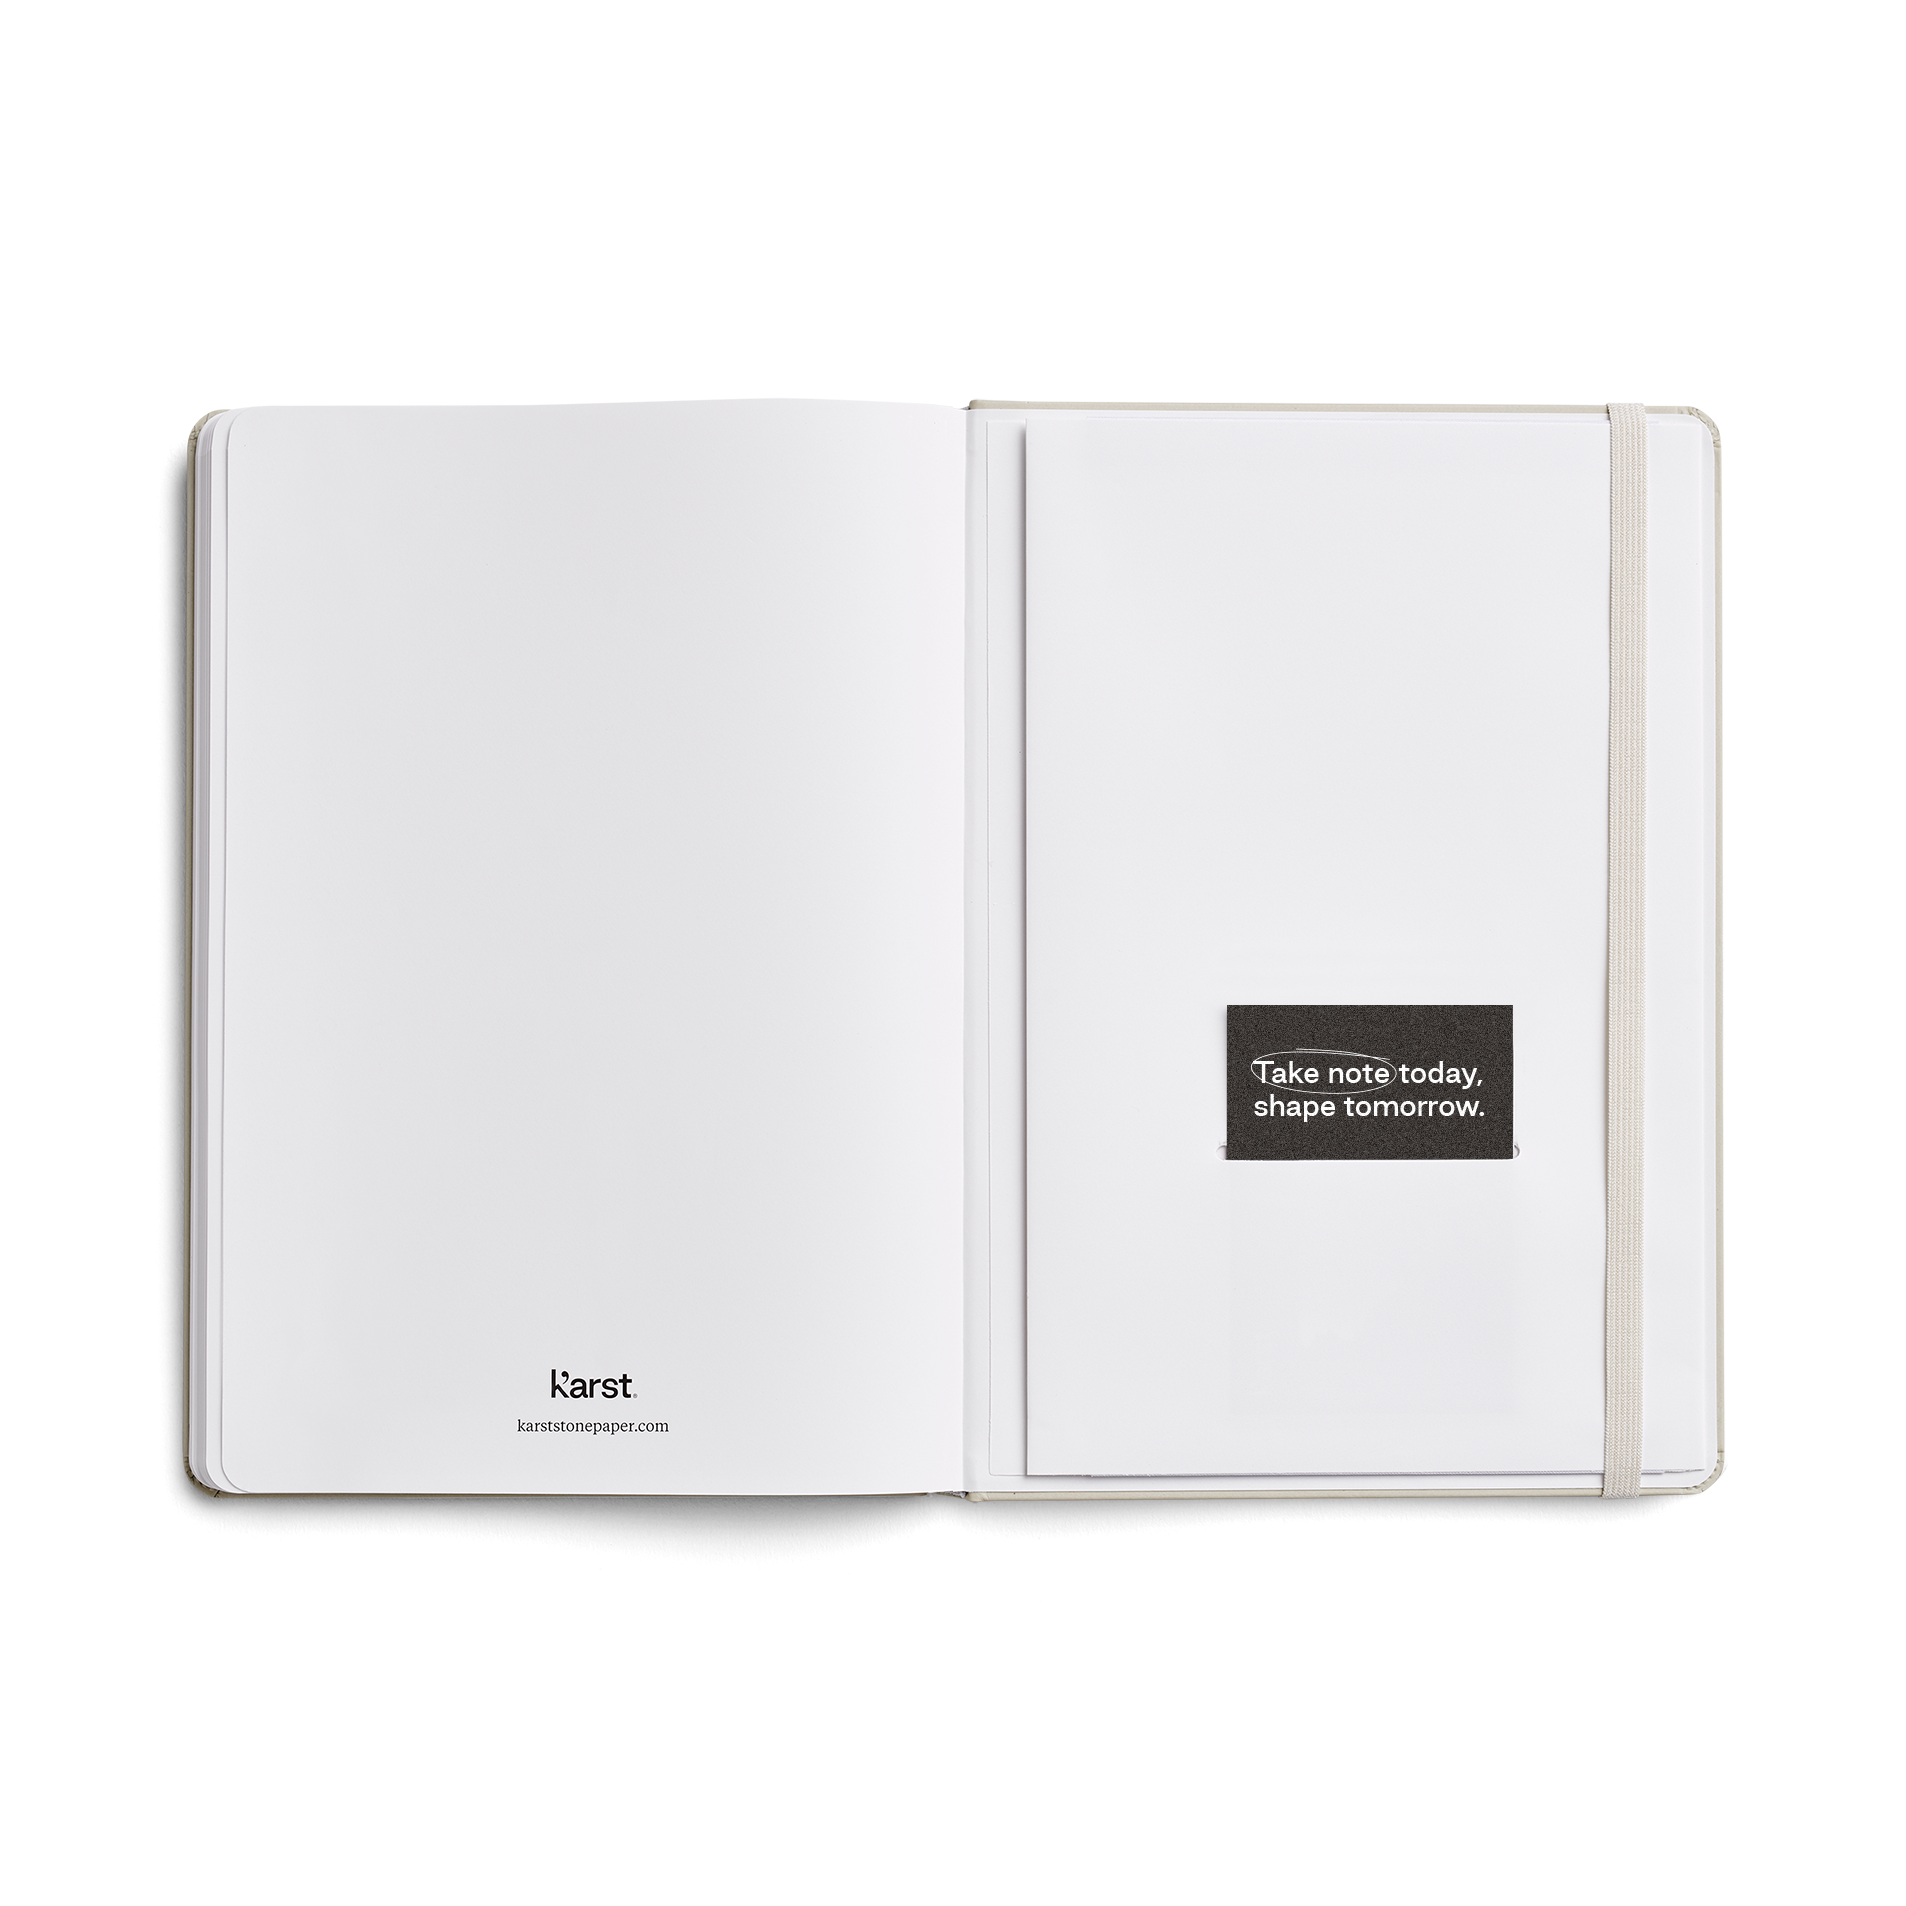 Recycled Paper Notebook , A5, Plain Cover Blank, Dotted or Ruled,  Eco-friendly, Carbon Offset Paper, Made in the UK 